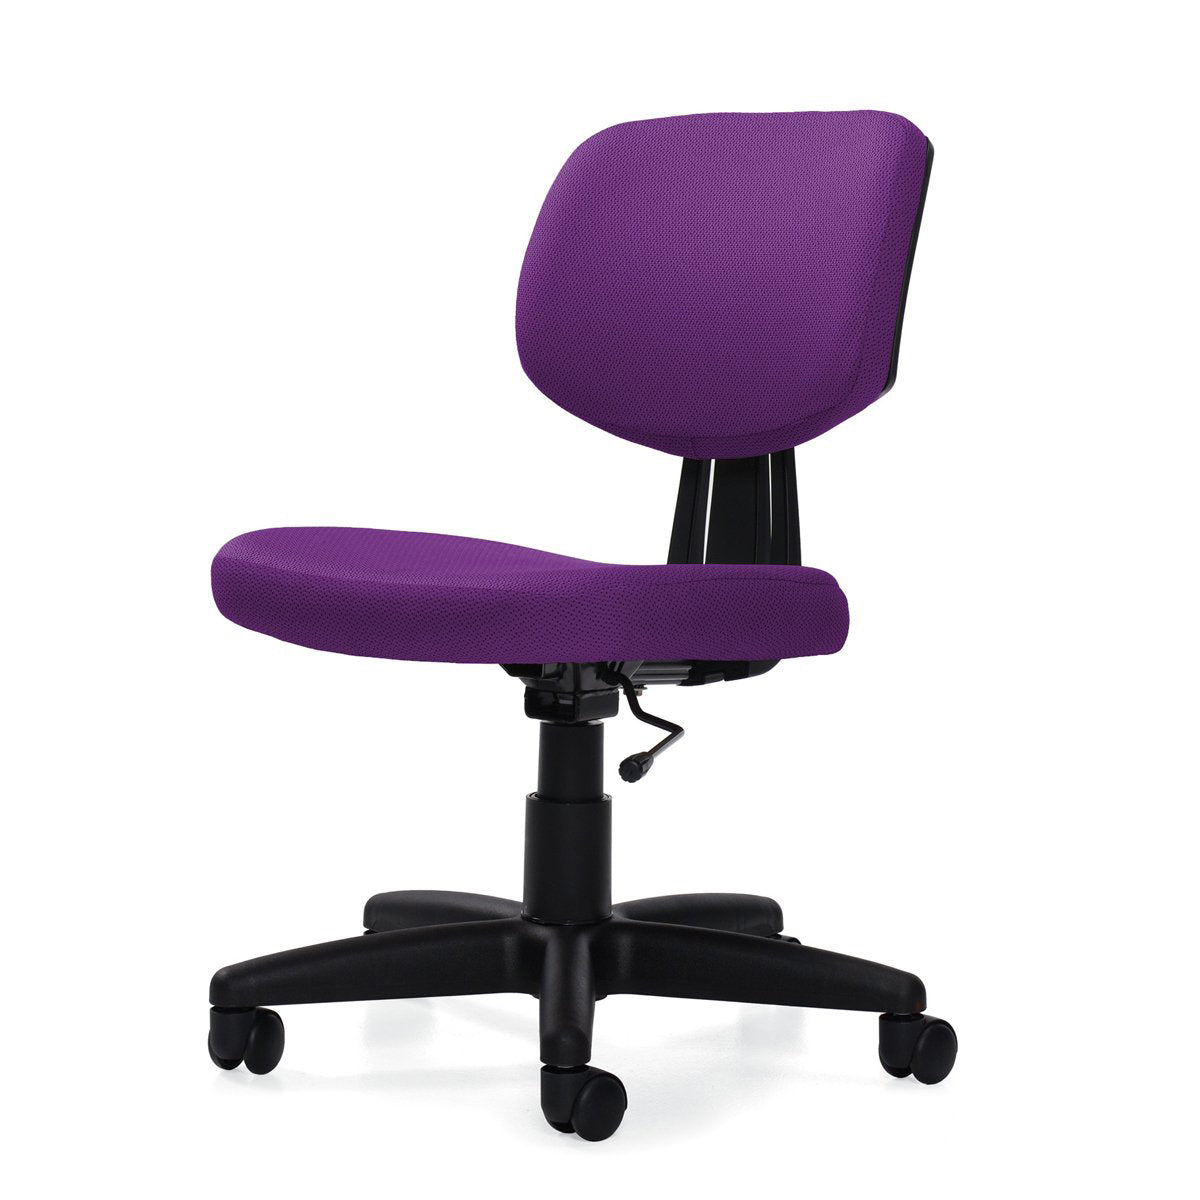 Violet student task chair